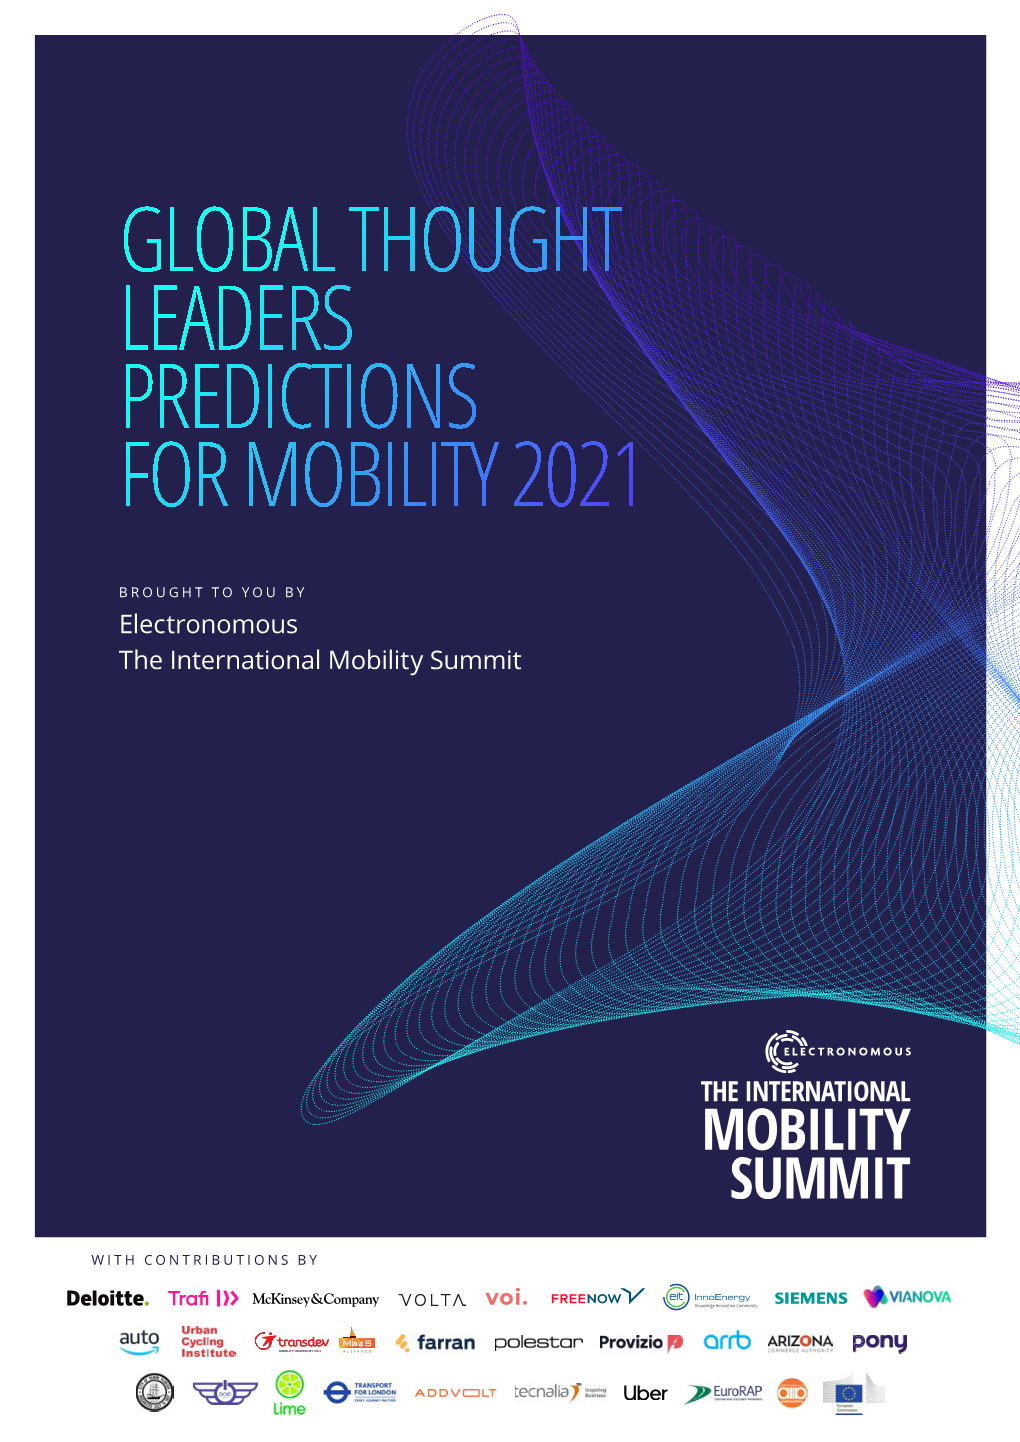 Global Thought Leaders 2021 Predictions for Mobility